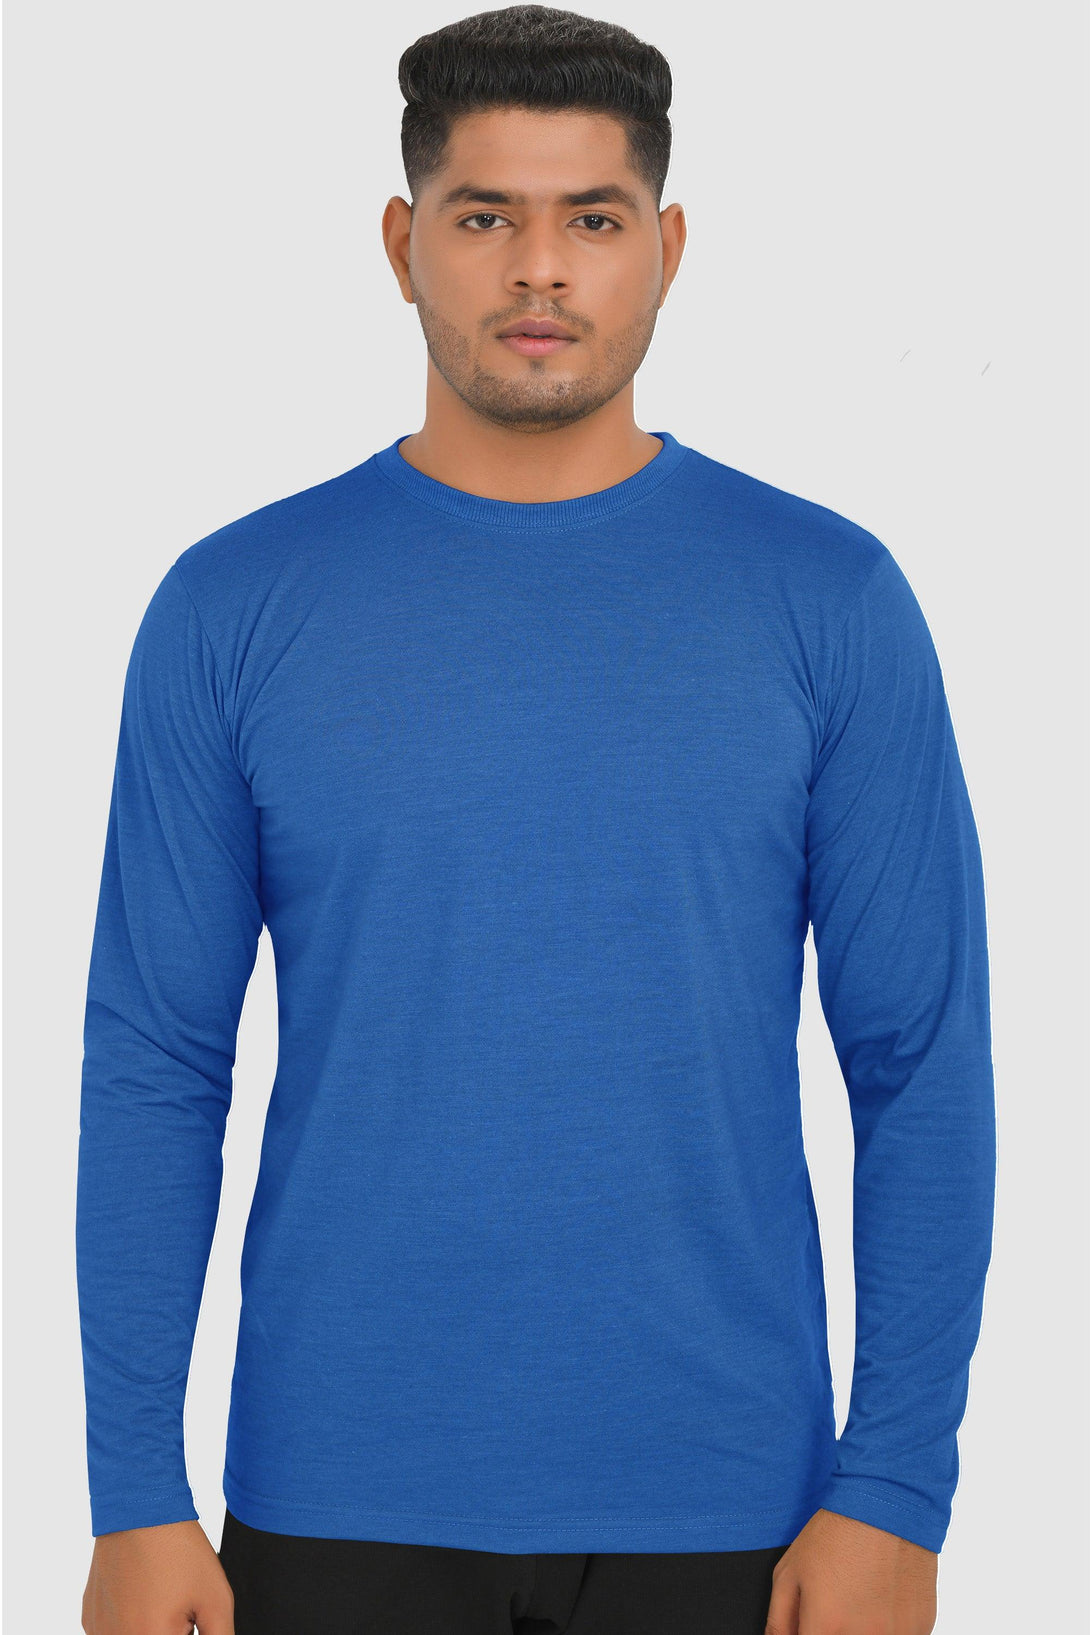 Long Sleeve Round Neck T-Shirts | BLUE - WINE - NAVY - FTS